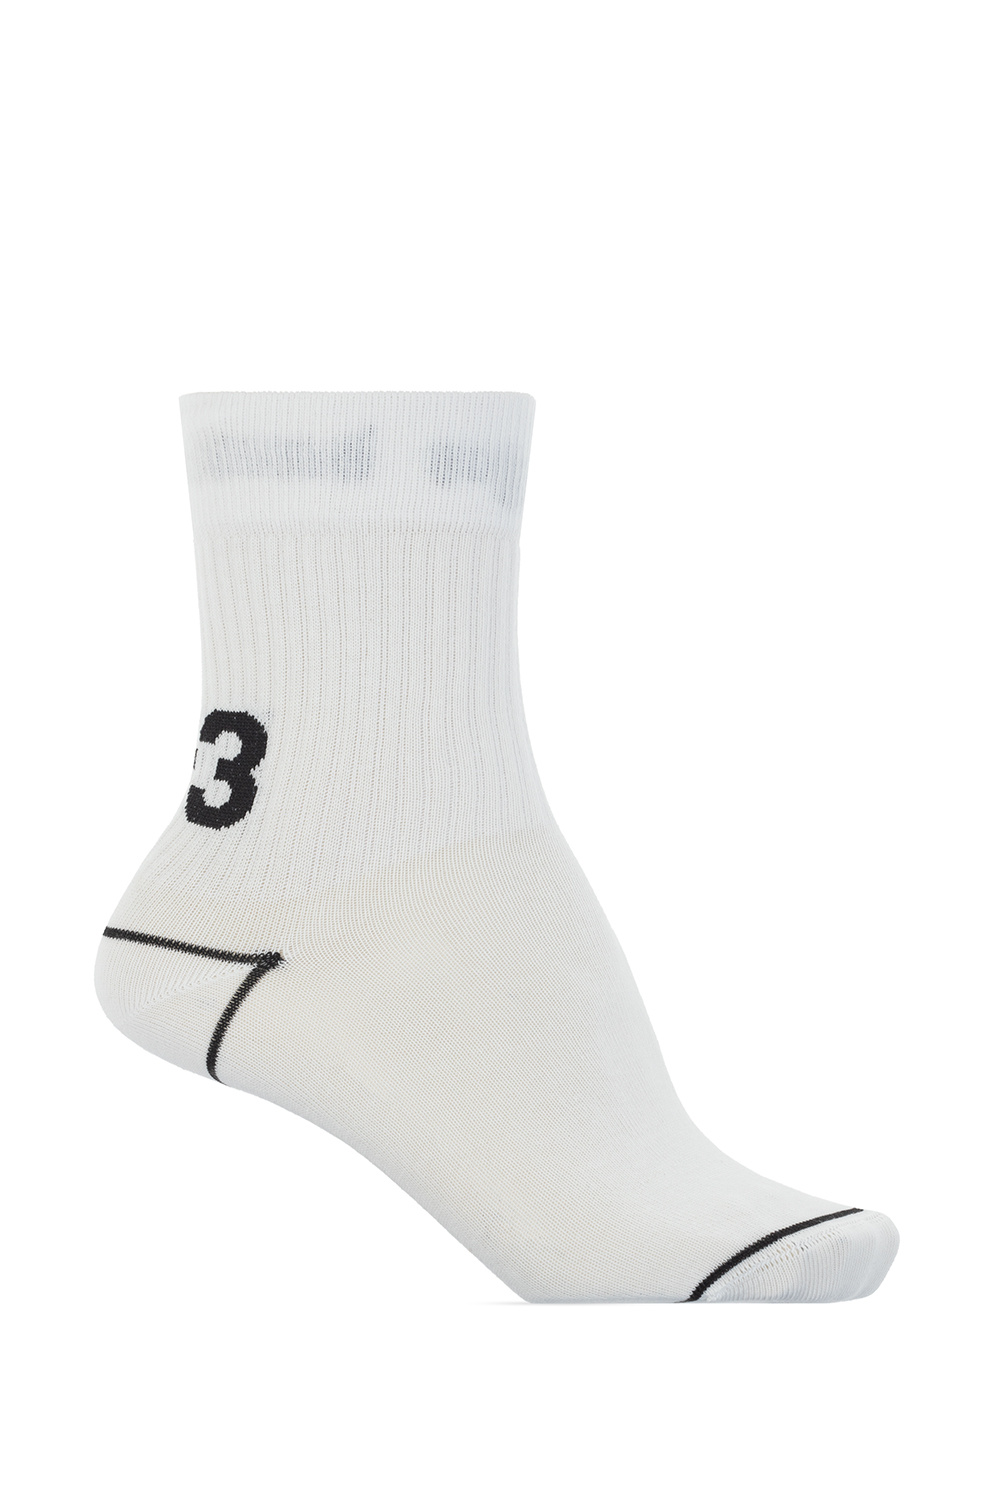 White socks from Y-3 Yohji Yamamoto. This pair features ribbed cuffs with a logo in black Socks with logo